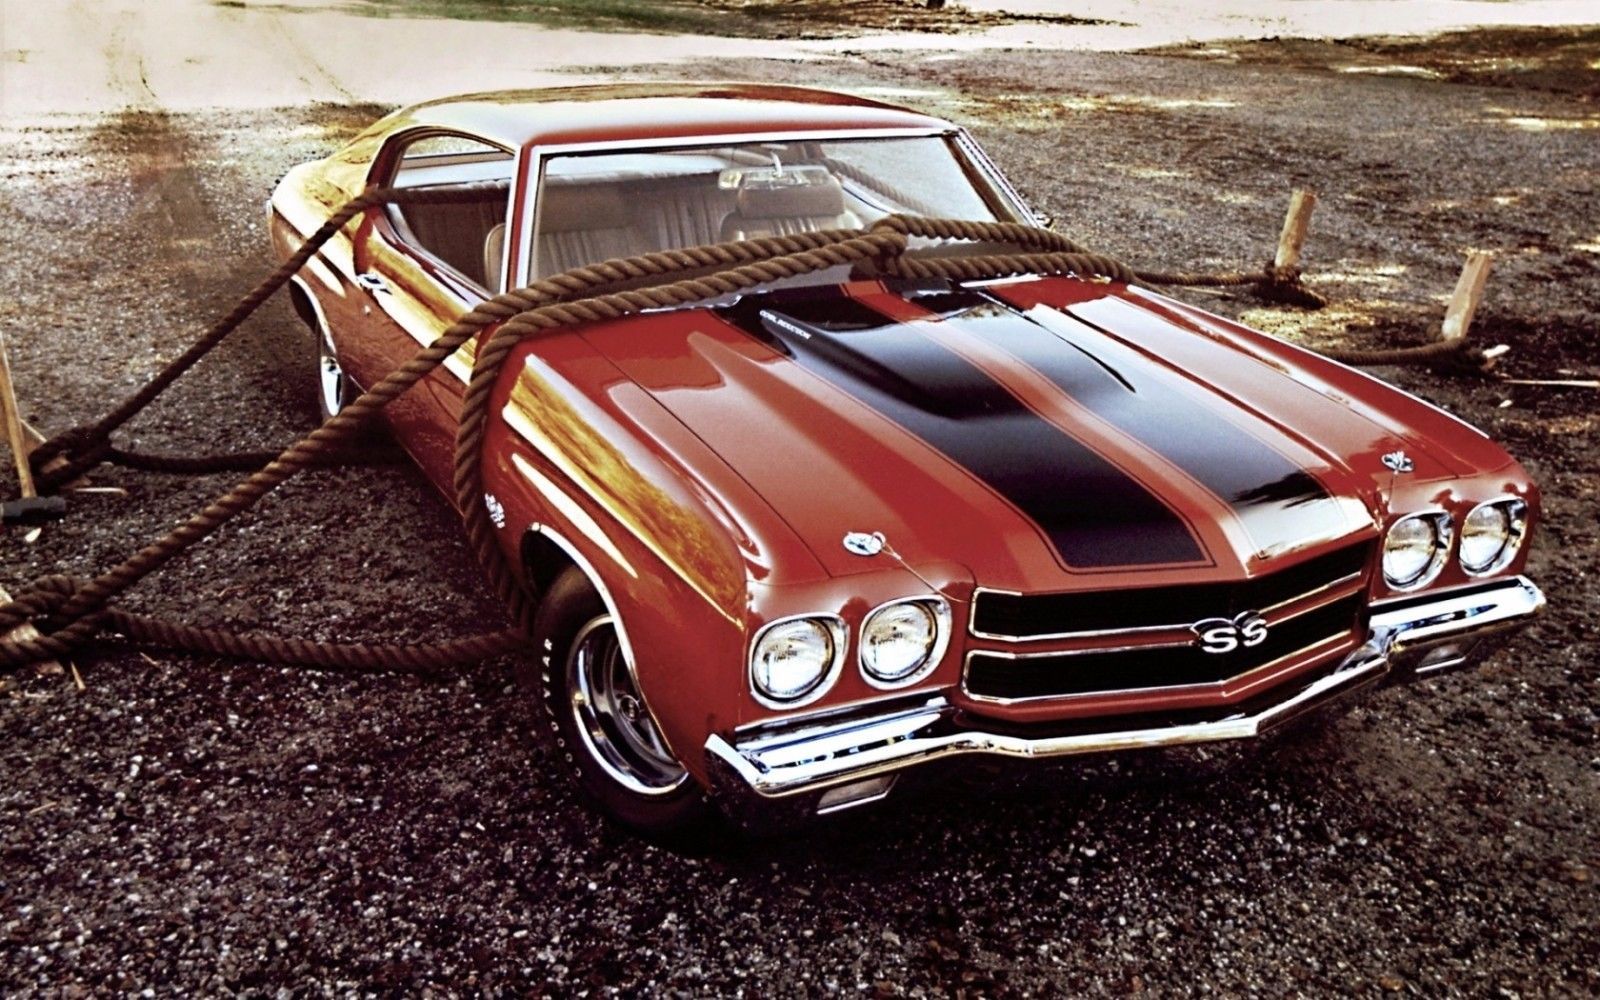 1970 Chevrolet Chevelle SS roped 24X36 inch poster, sports car, muscle